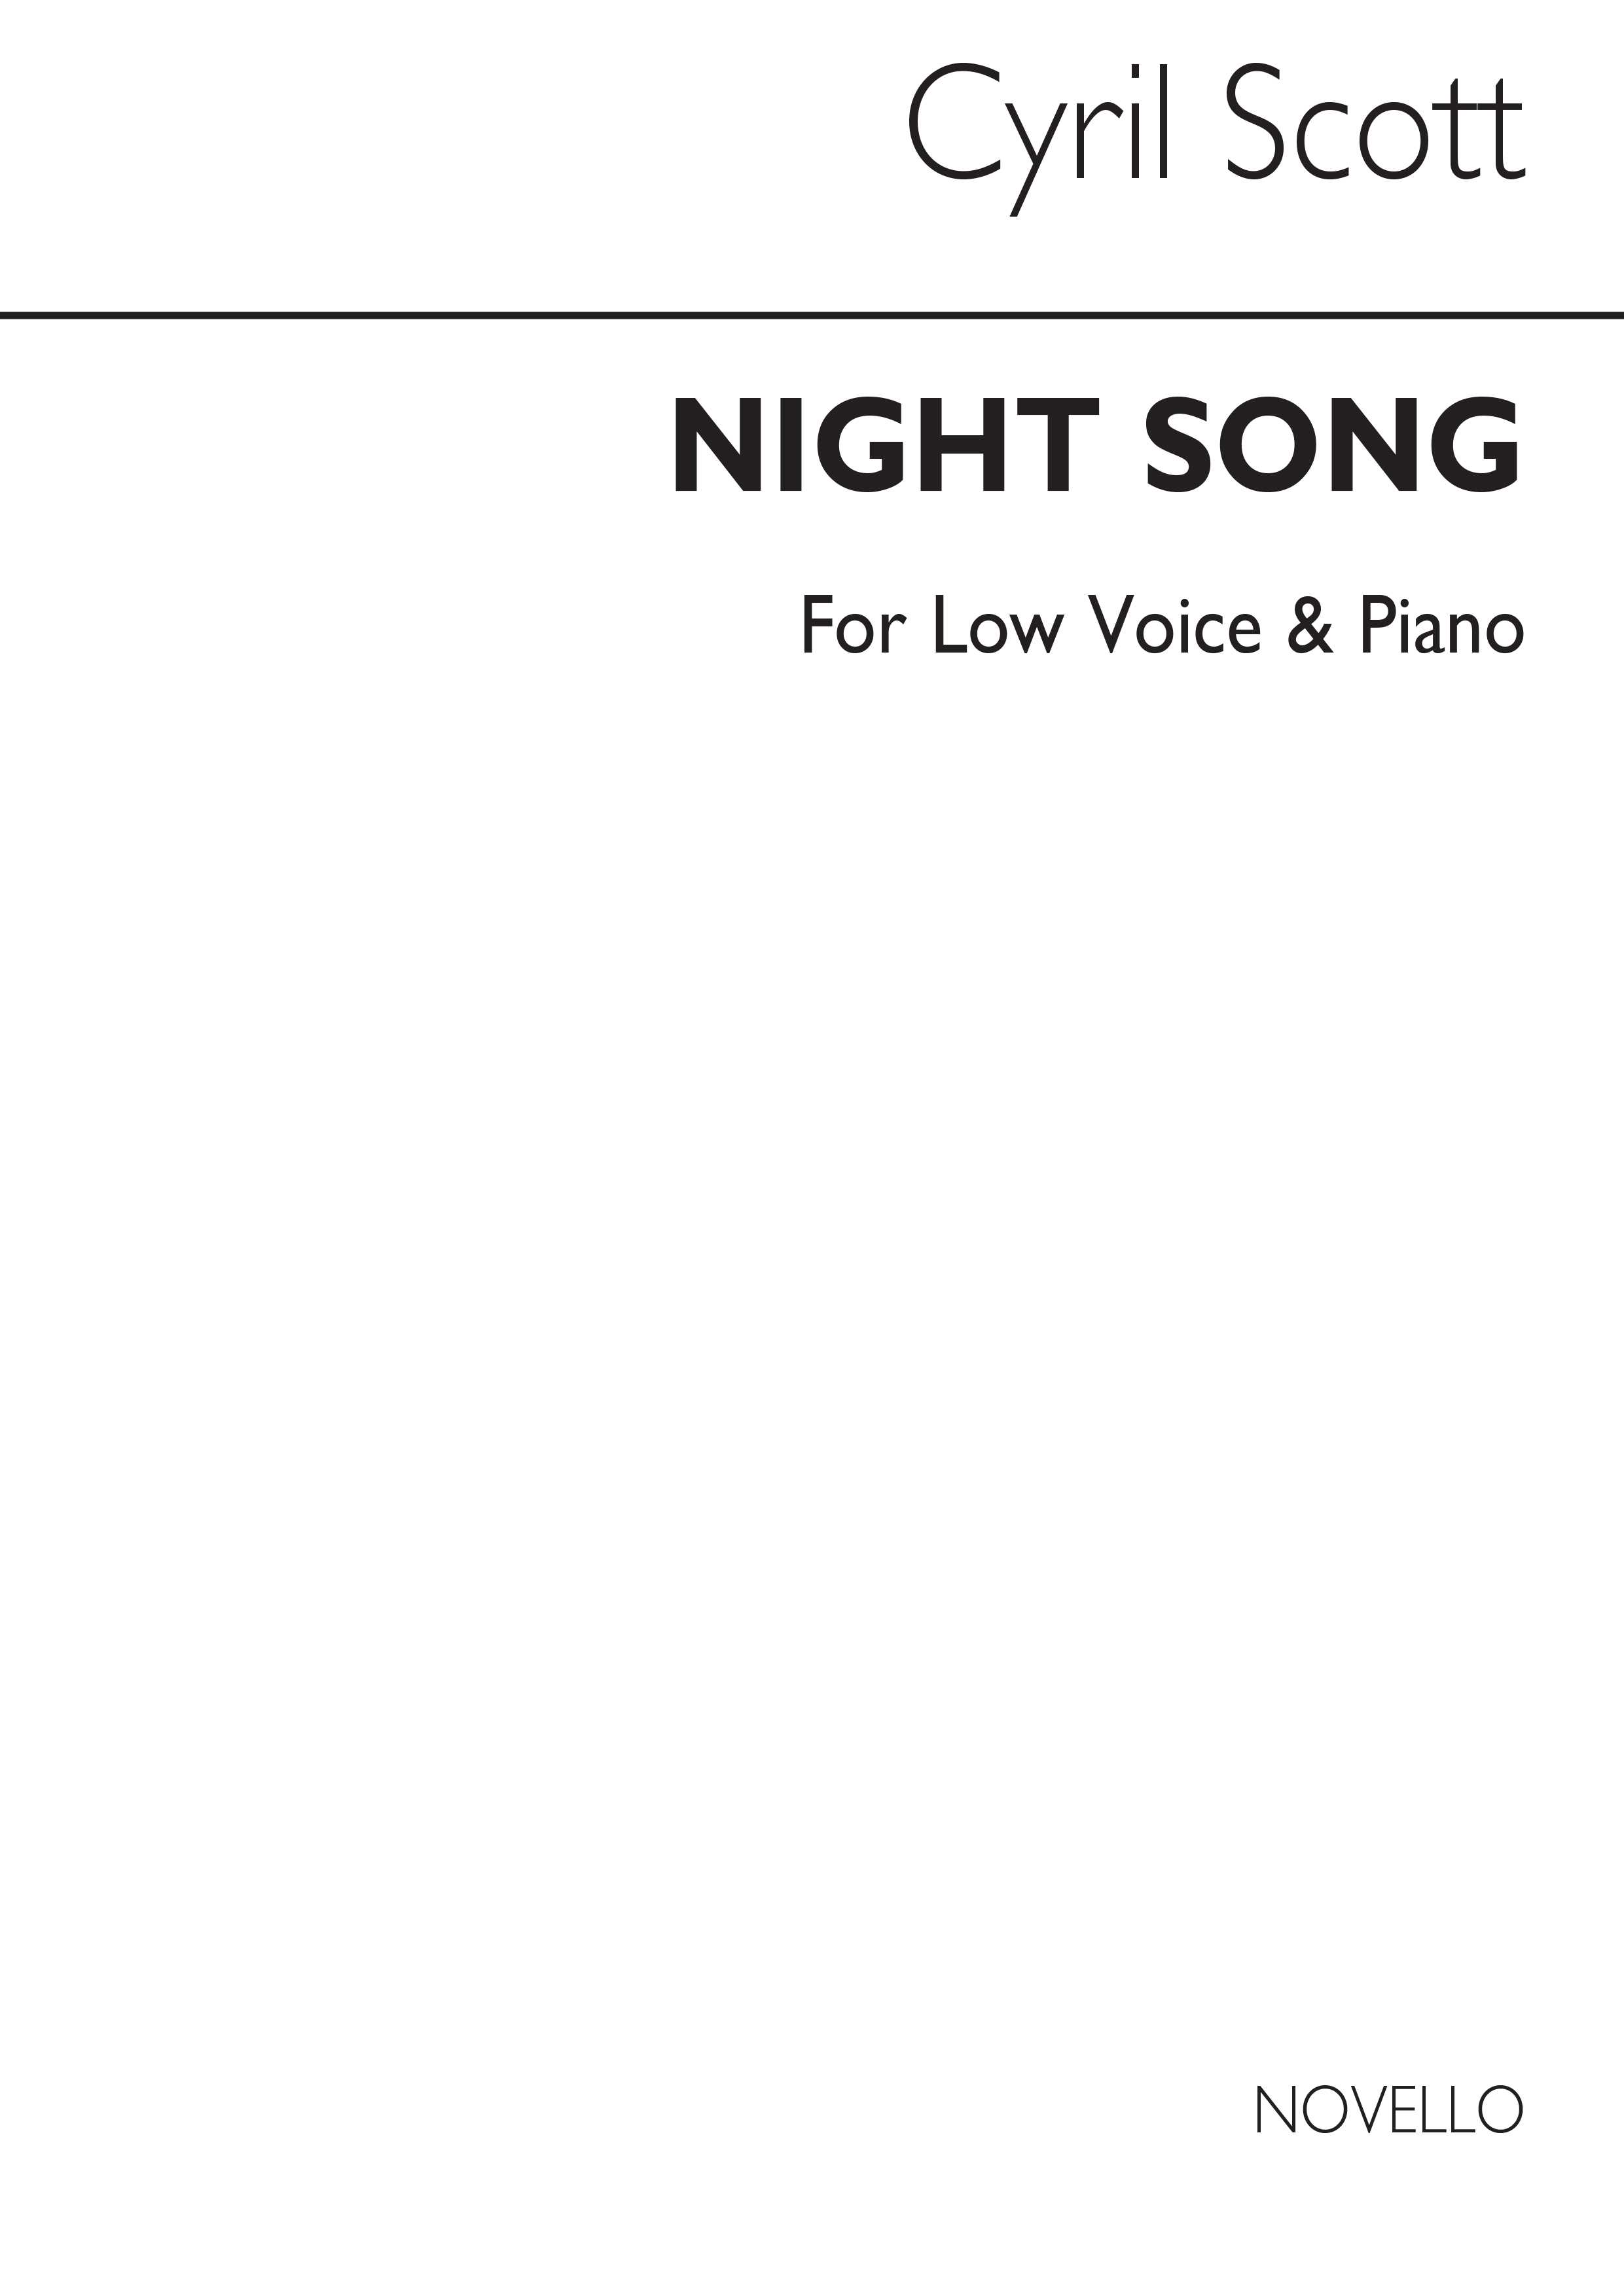 Cyril Scott: Night Song-low Voice/Piano (Key-d Flat)